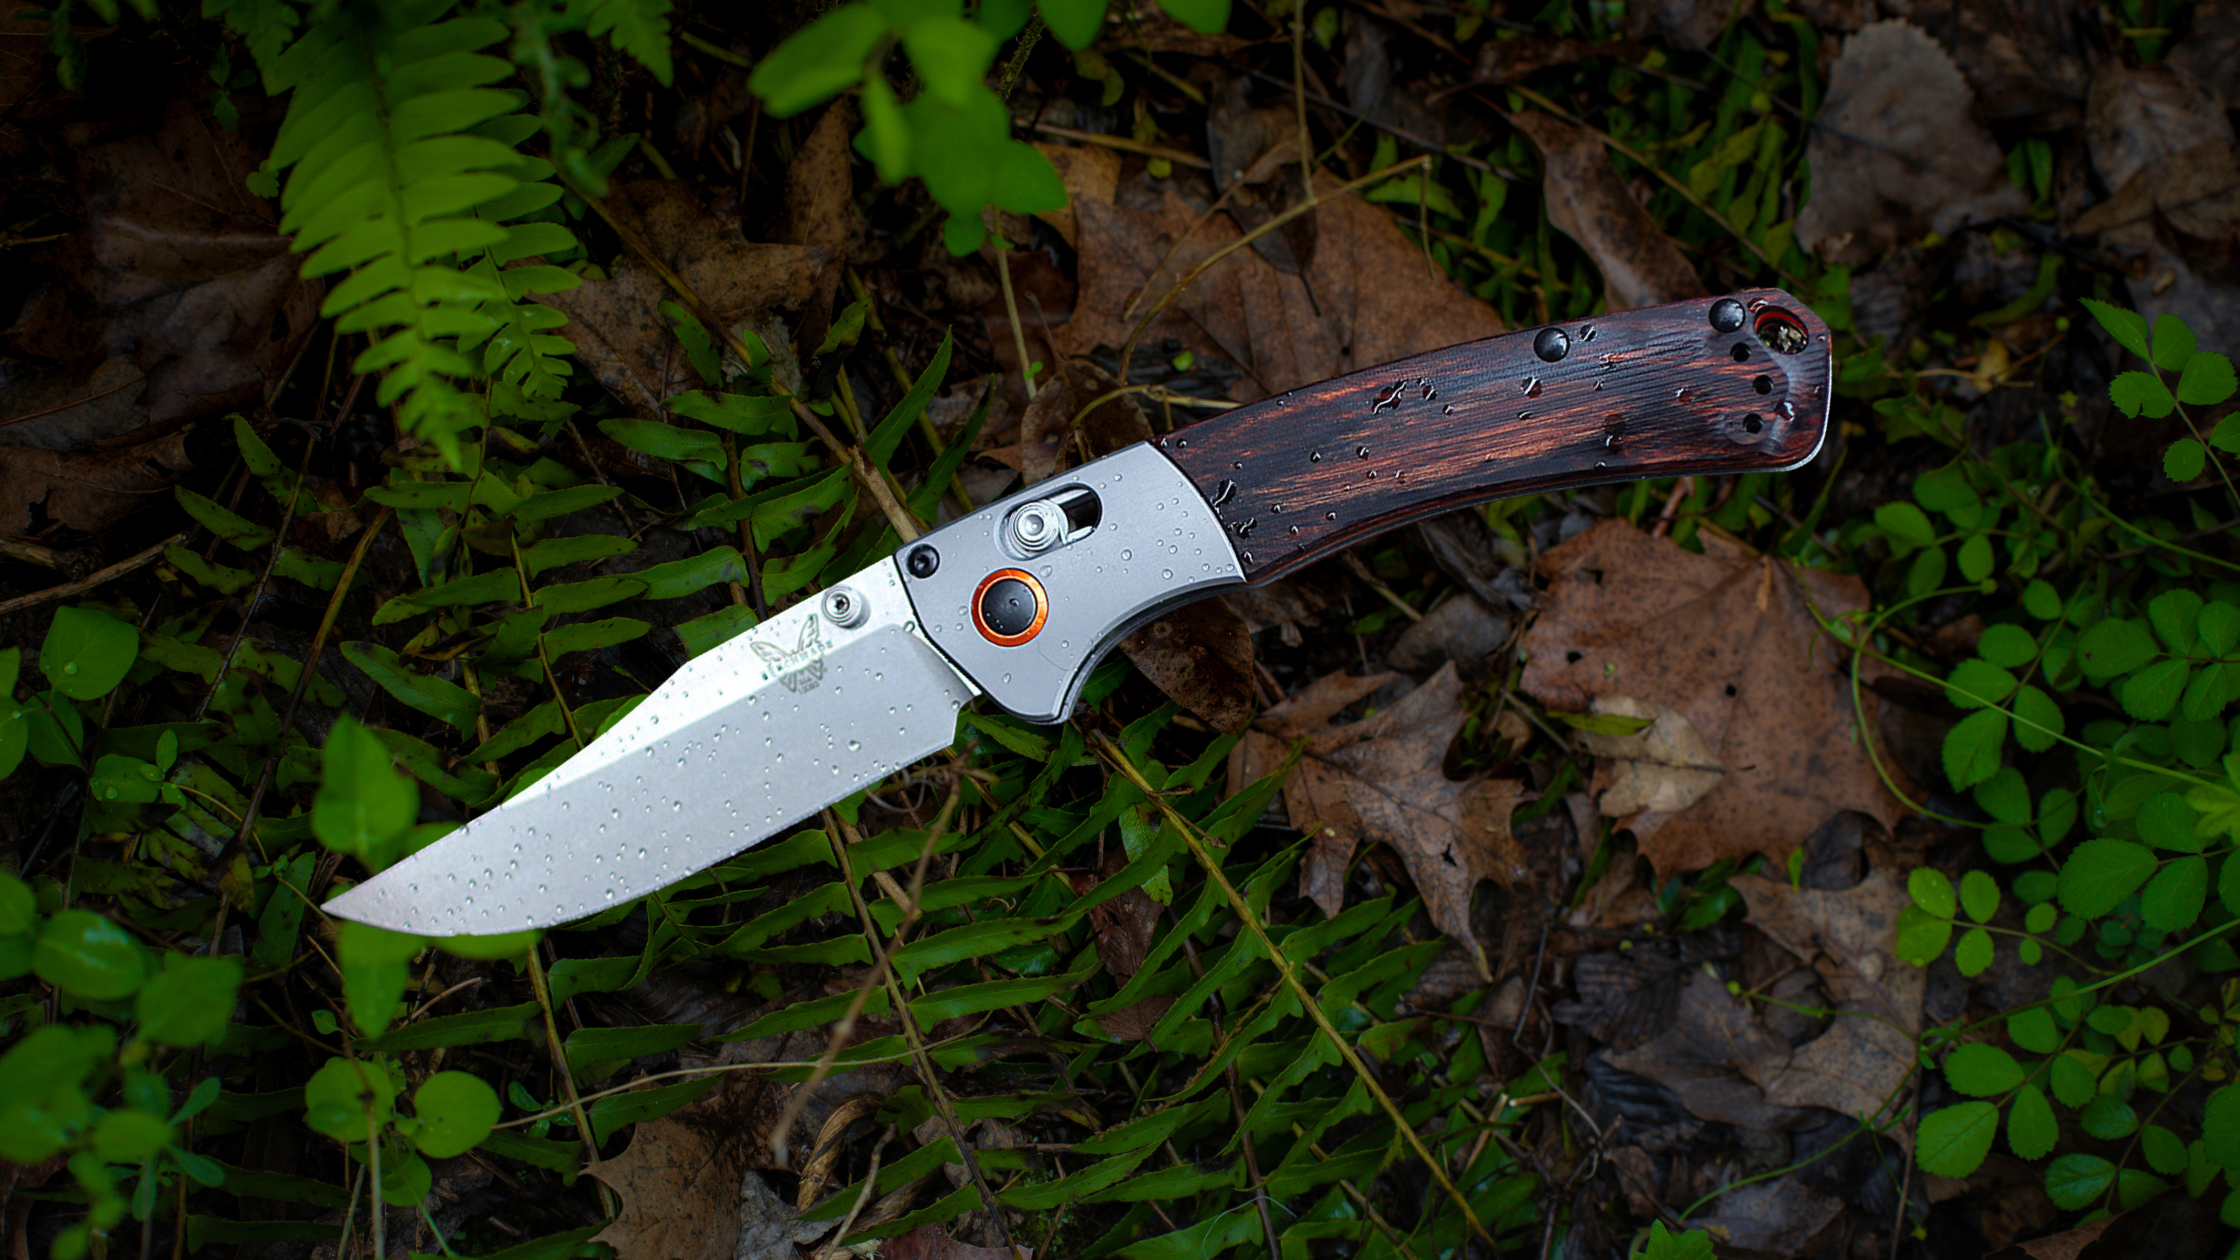 Benchmade Mini Crooked River